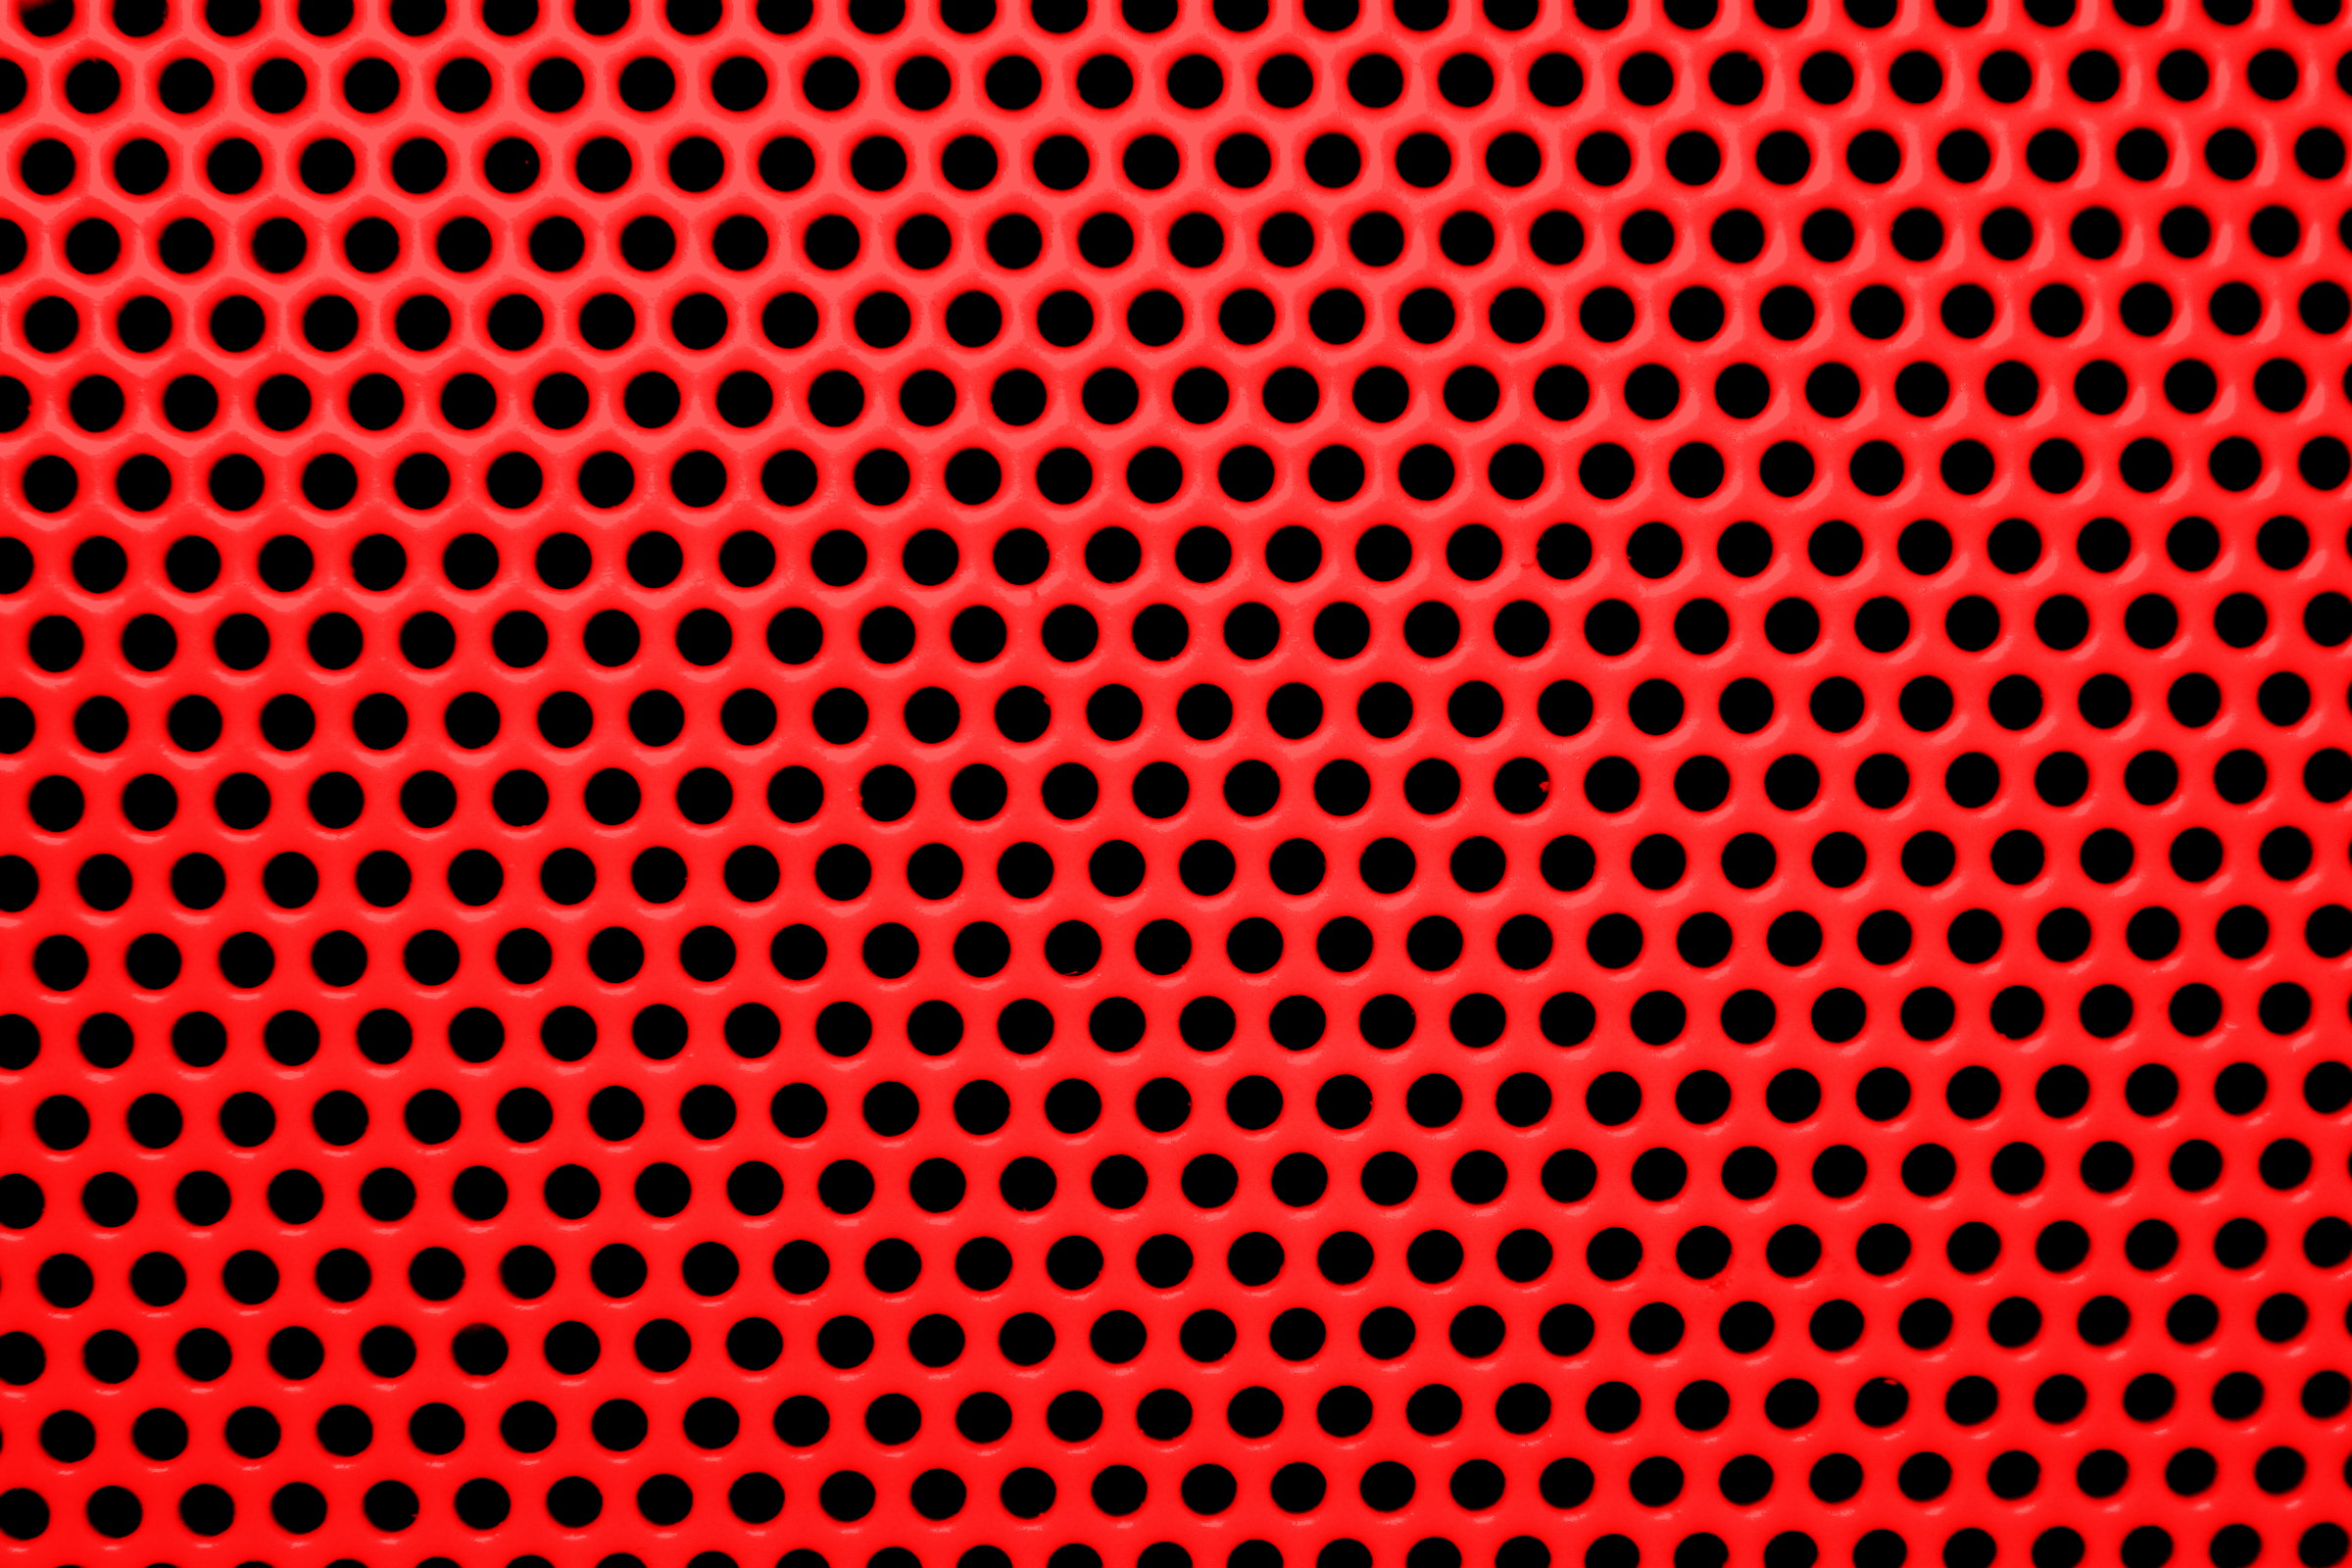 Bright Red Mesh with Round Holes Texture Picture | Free Photograph ...